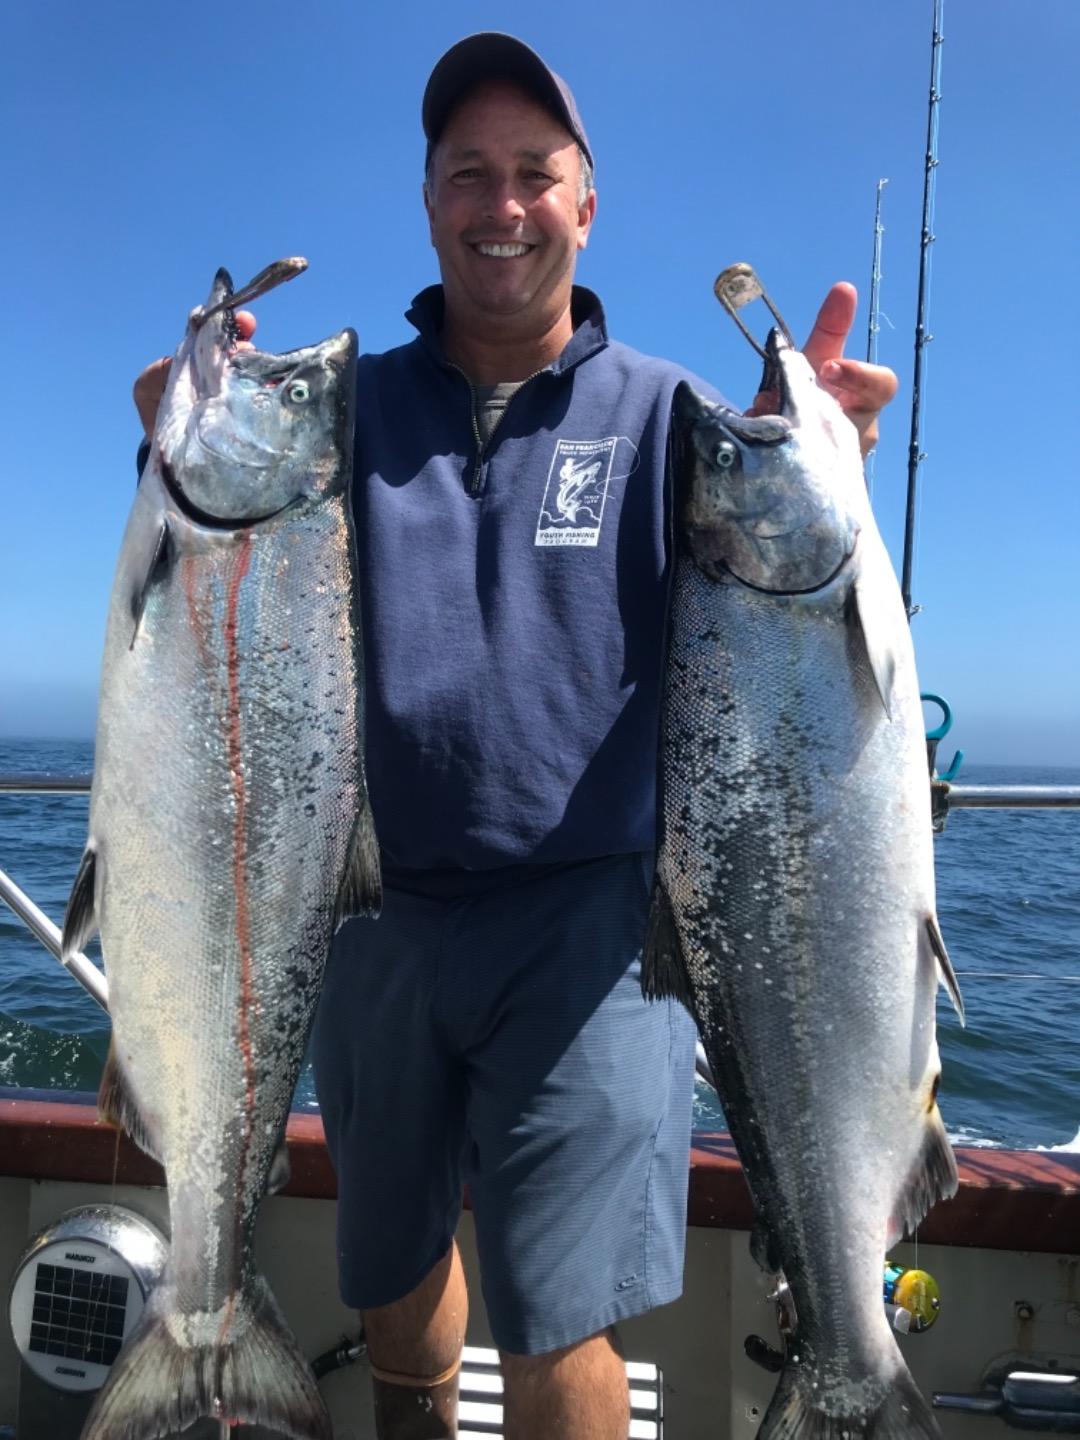 Another solid day of salmon fishing!